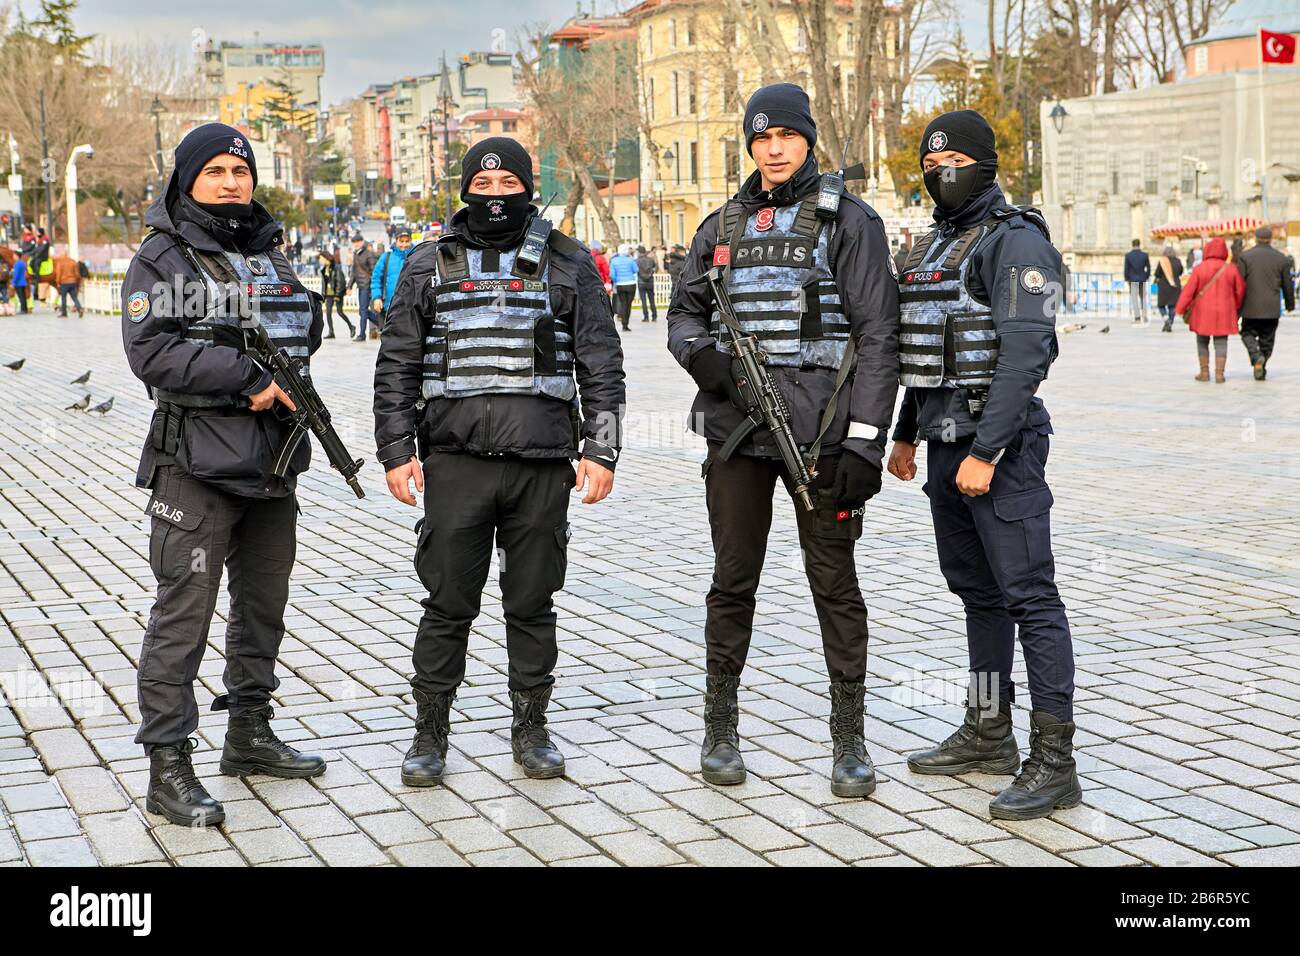 Istanbul, Turkey - February 11, 2020: Four young policemen armed with automatic weapons in uniform and with body armor at Sultanahmet Meydan on a gloo Stock Photo